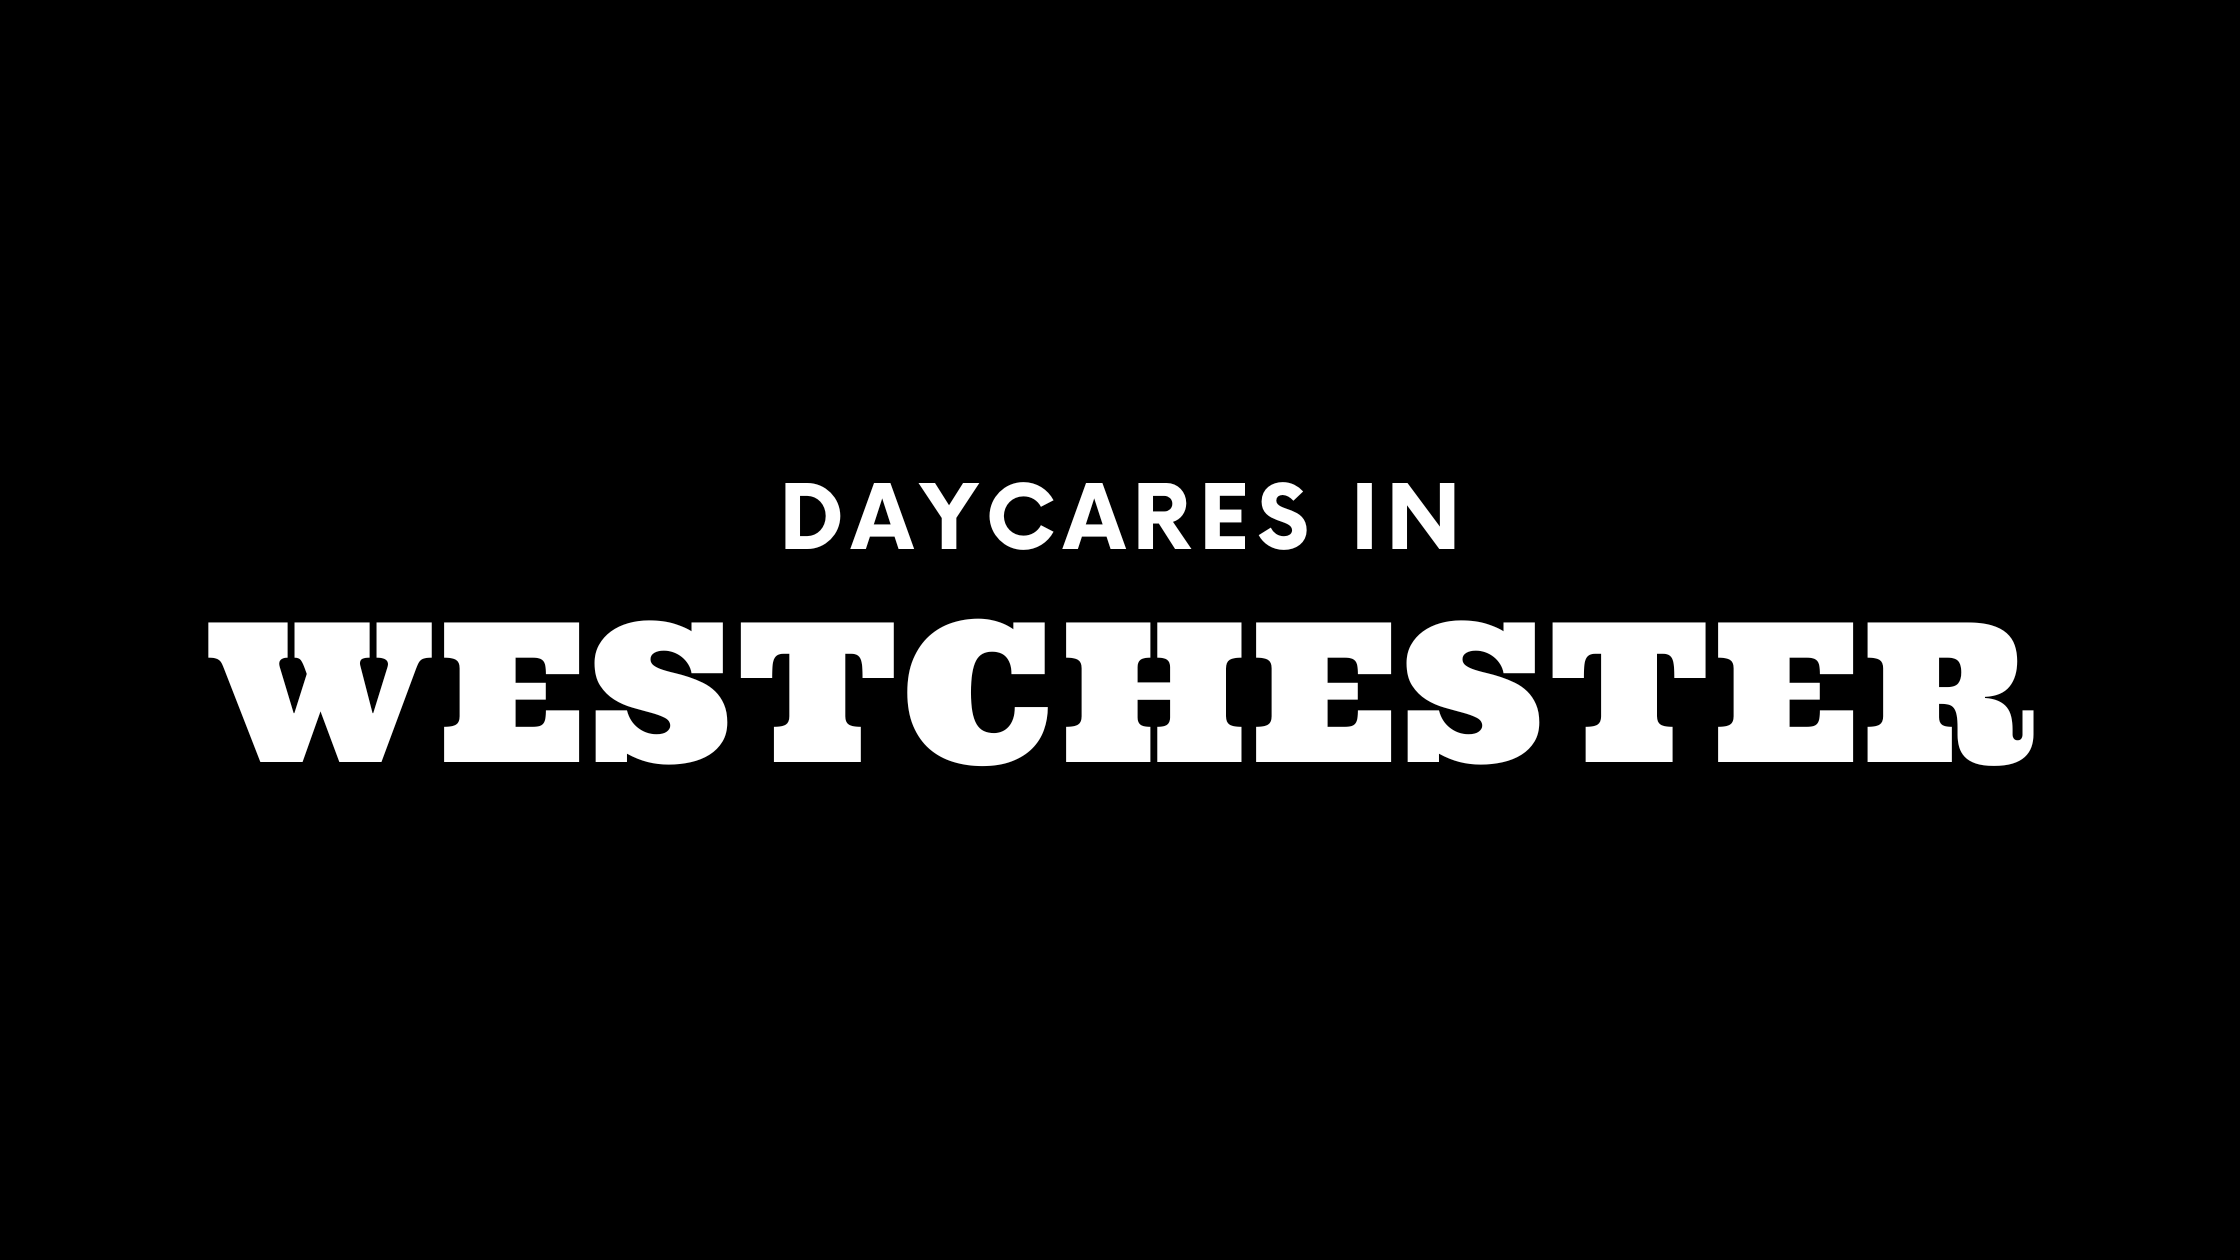 Daycares in Westchester